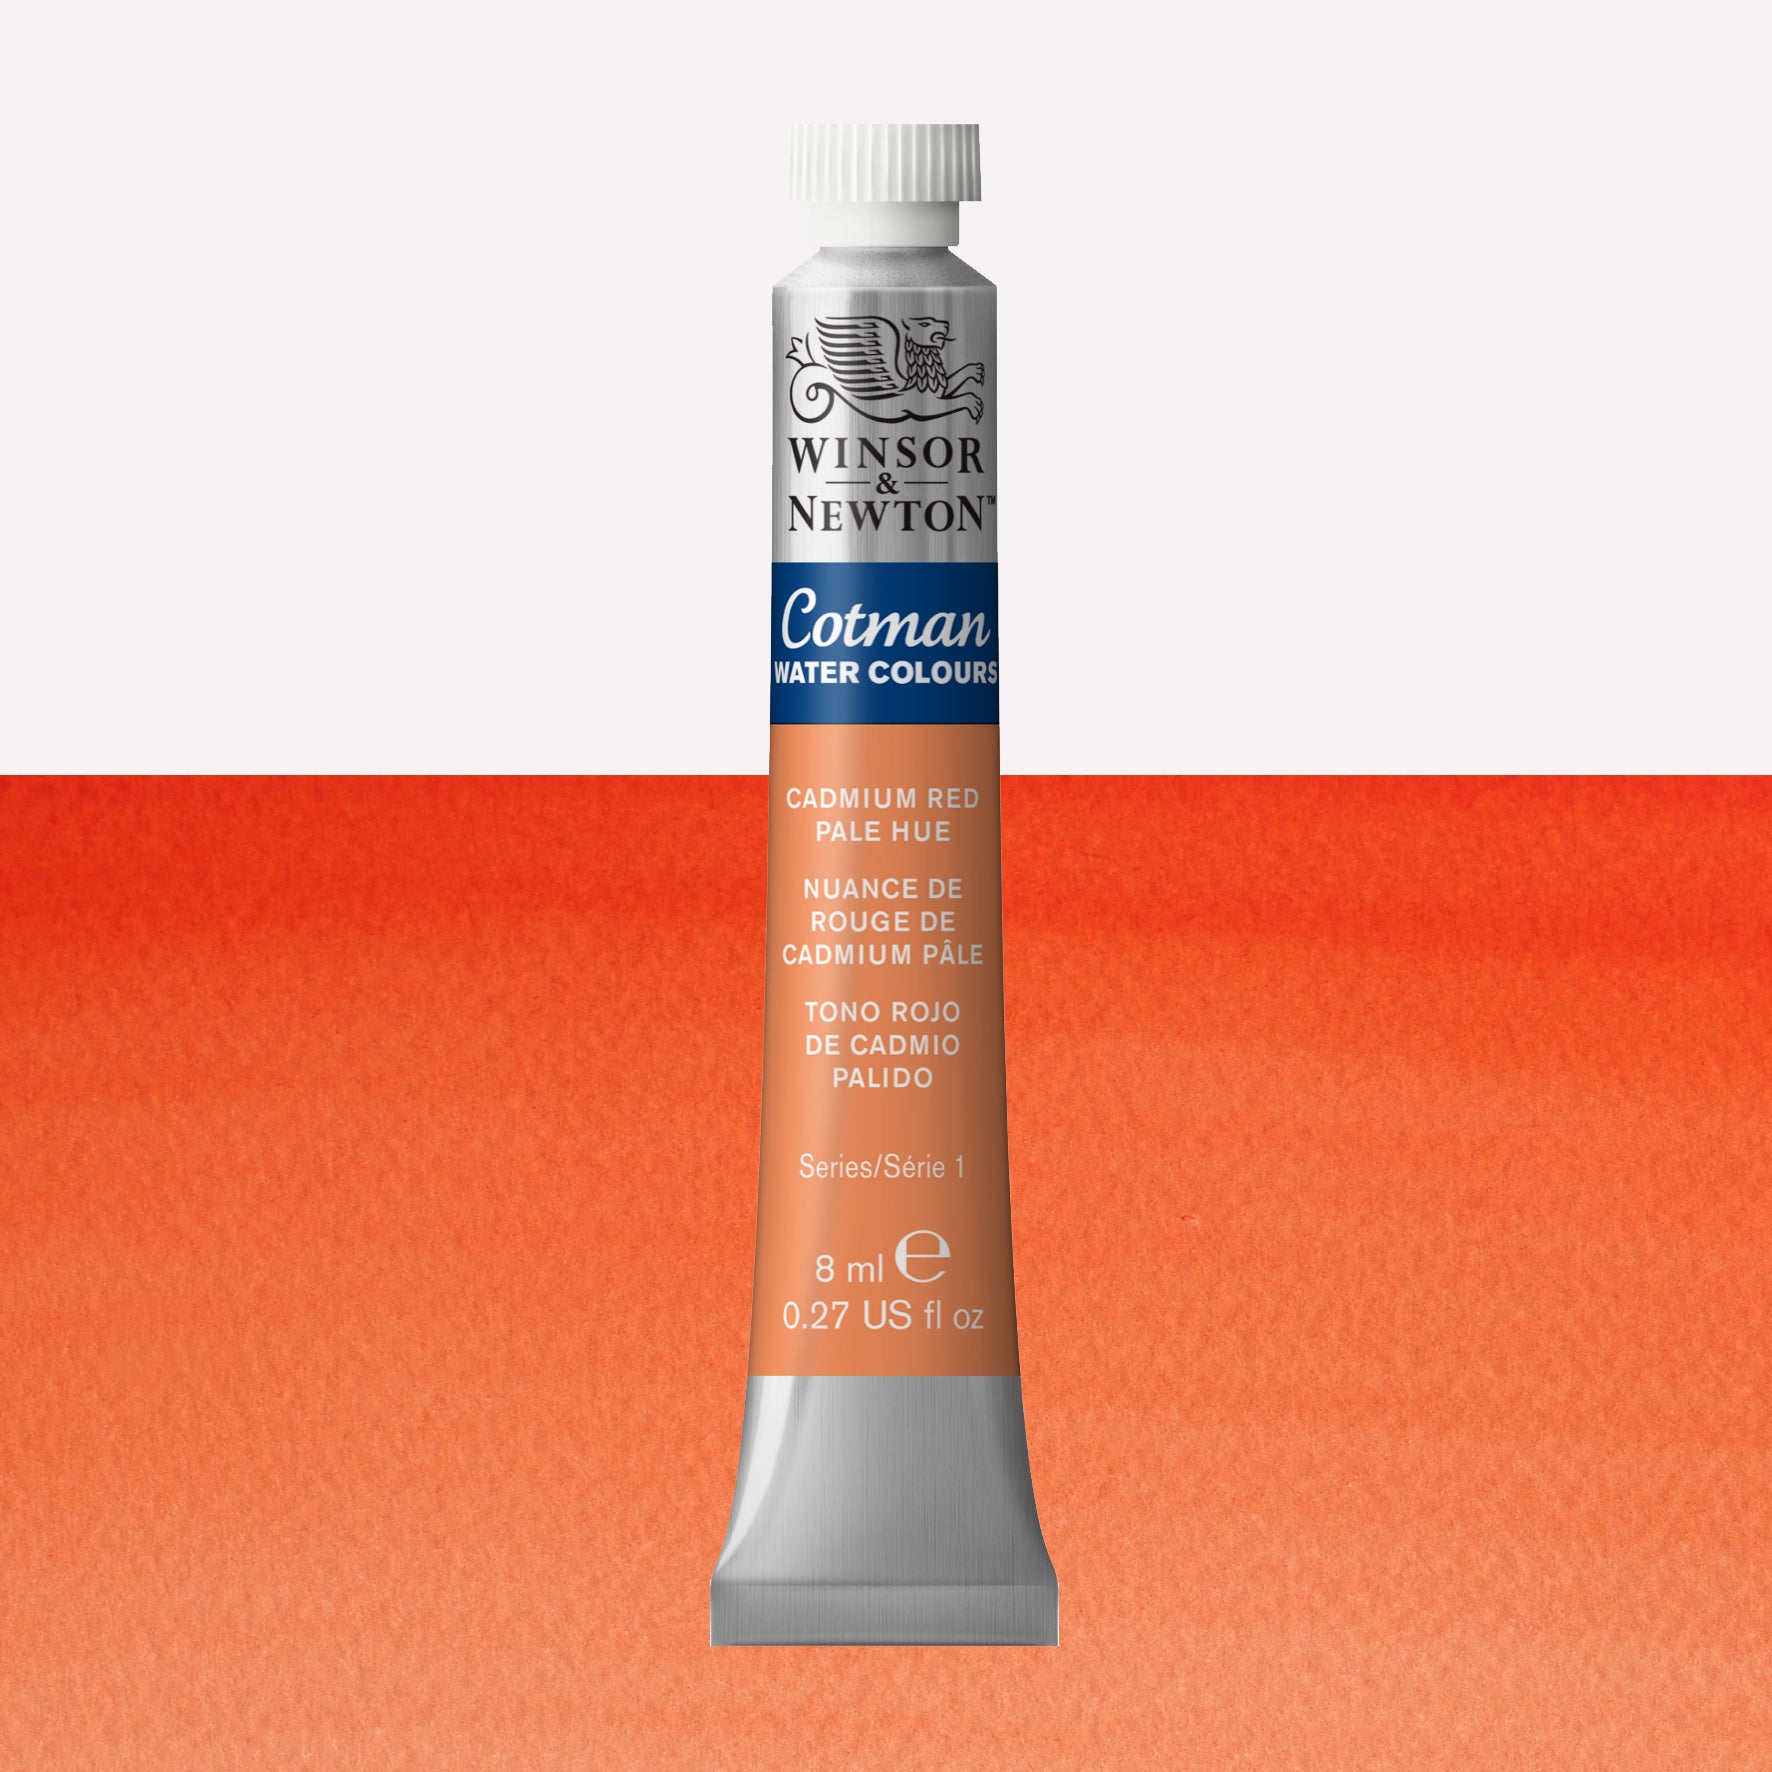 Winsor & Newton Cotman watercolour paint packaged in 8ml silver tubes with a white lid in the shade Cadmium Red Pale Hue  over a highly pigmented colour swatch.